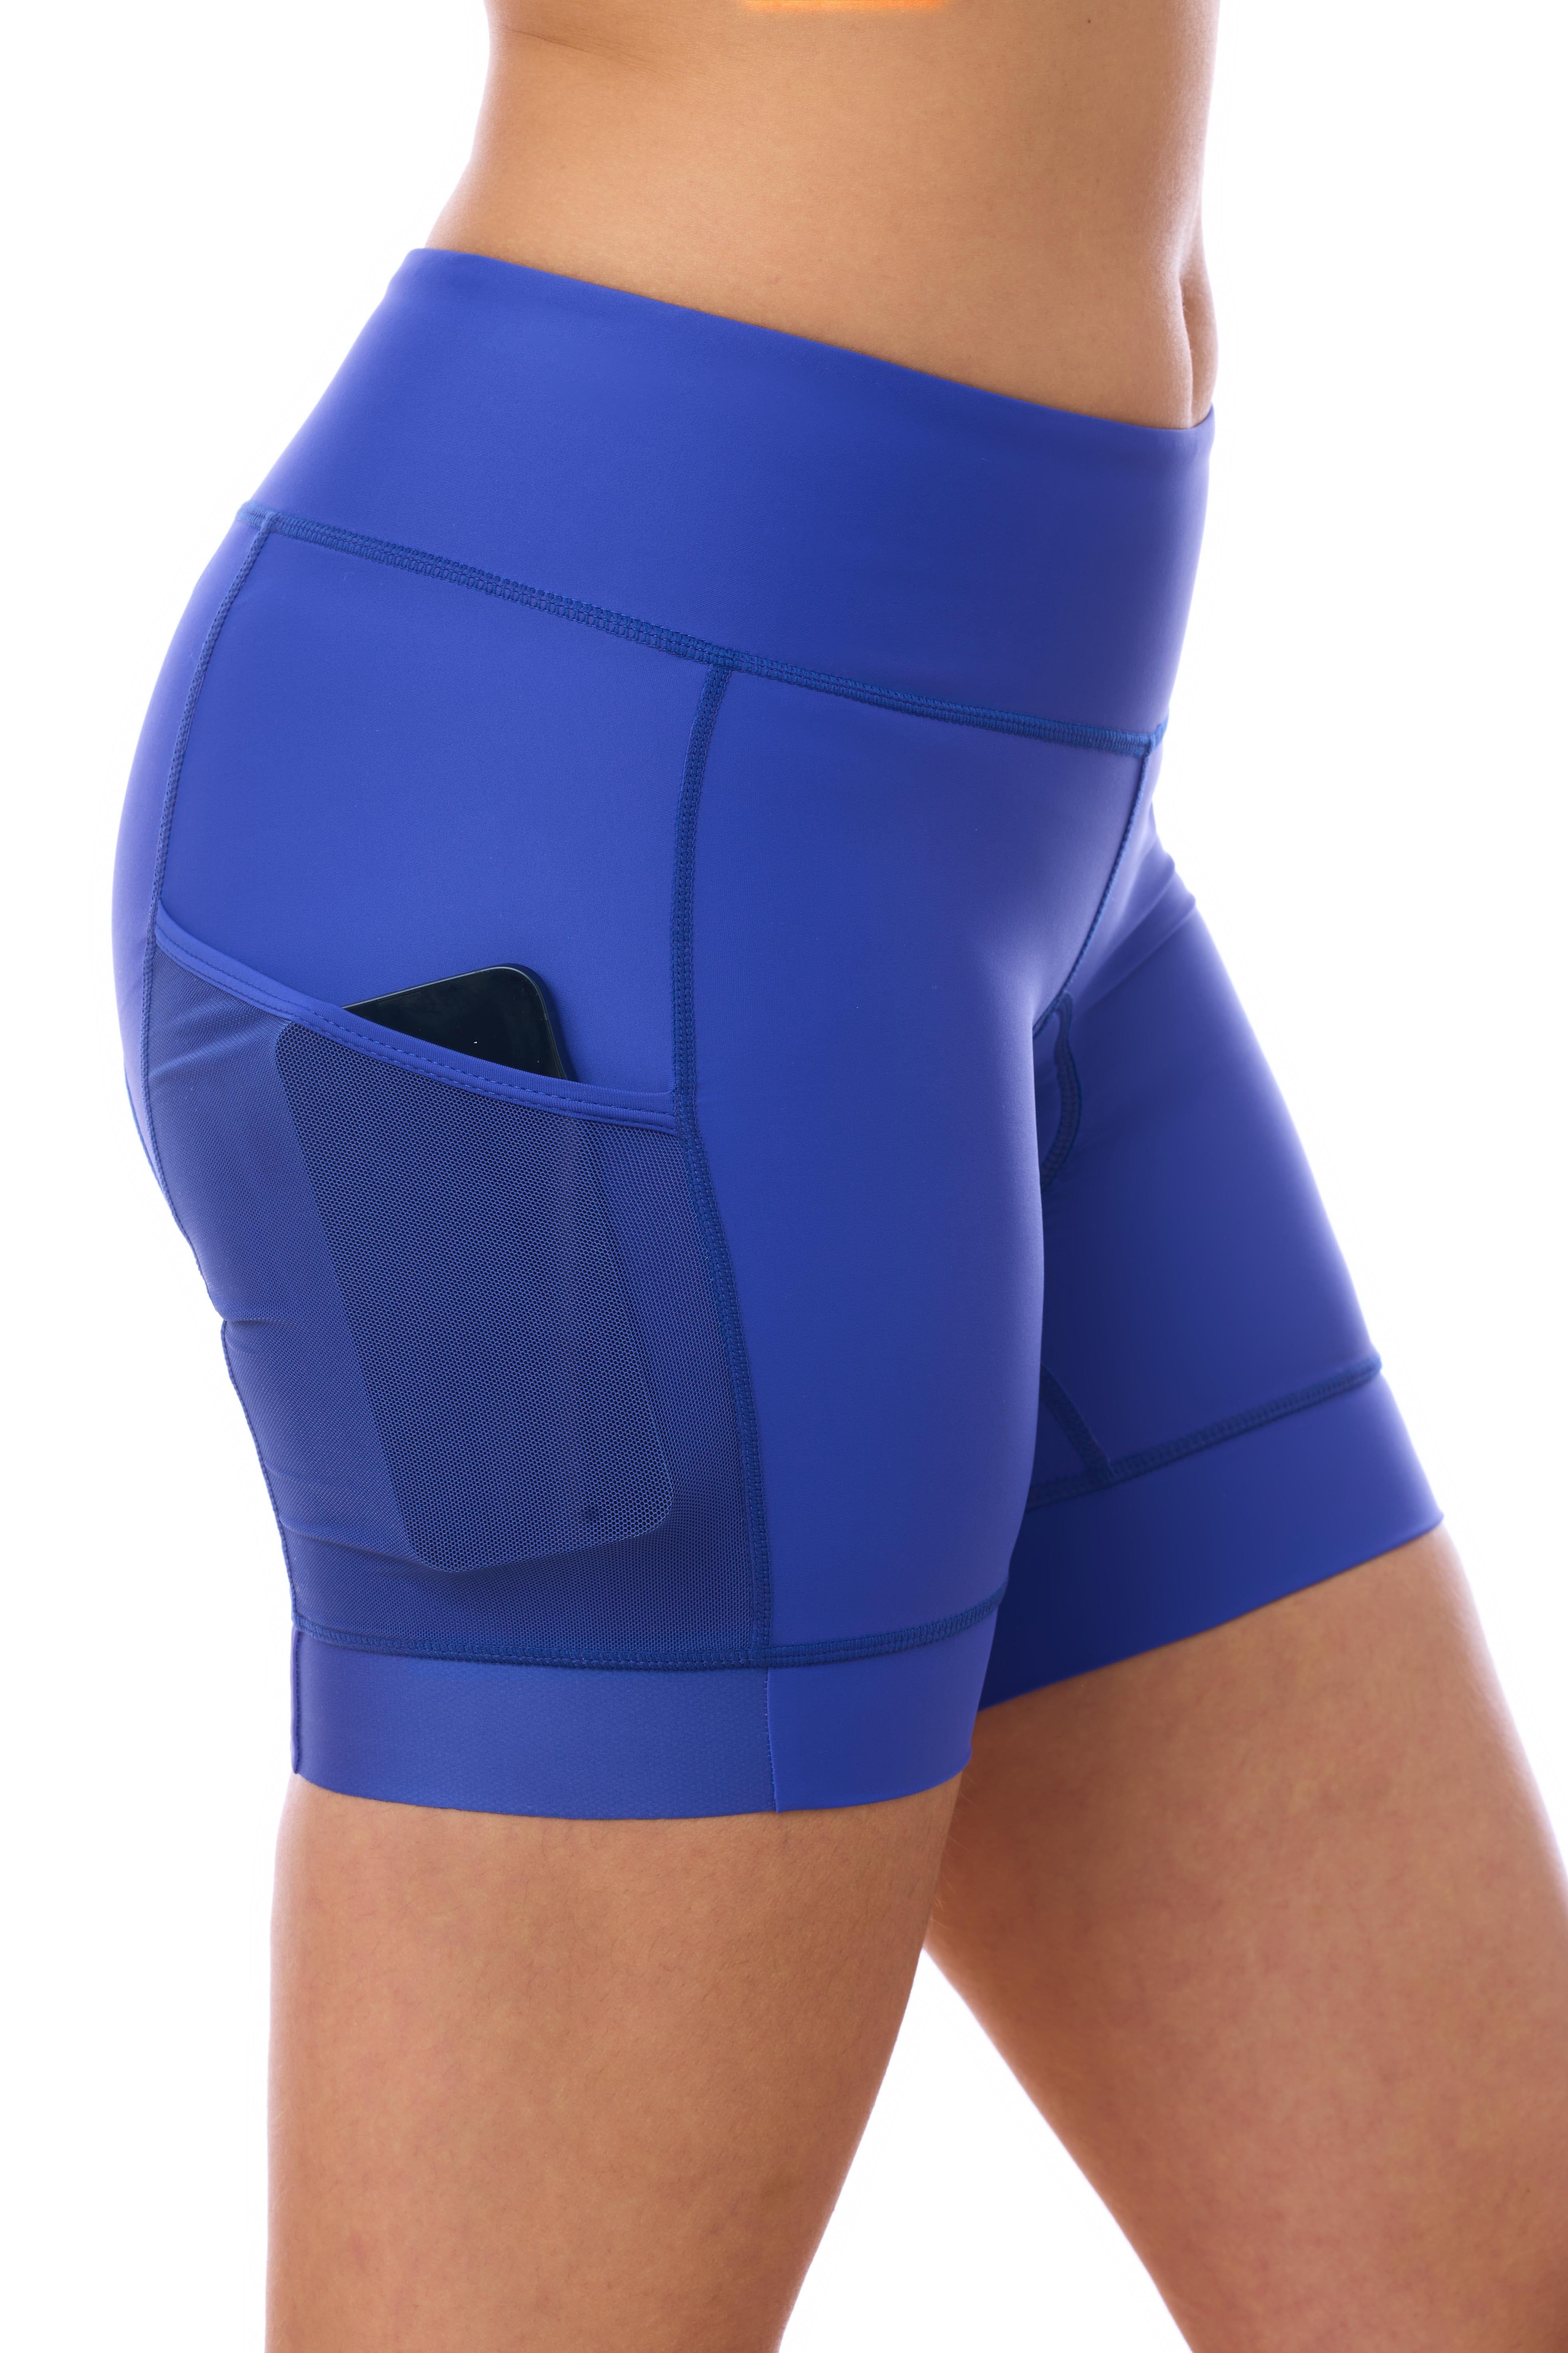 JolieRide Cycling shorts mid-thigh fit cycling shorts with 5 1/2" Inseam and UV protection